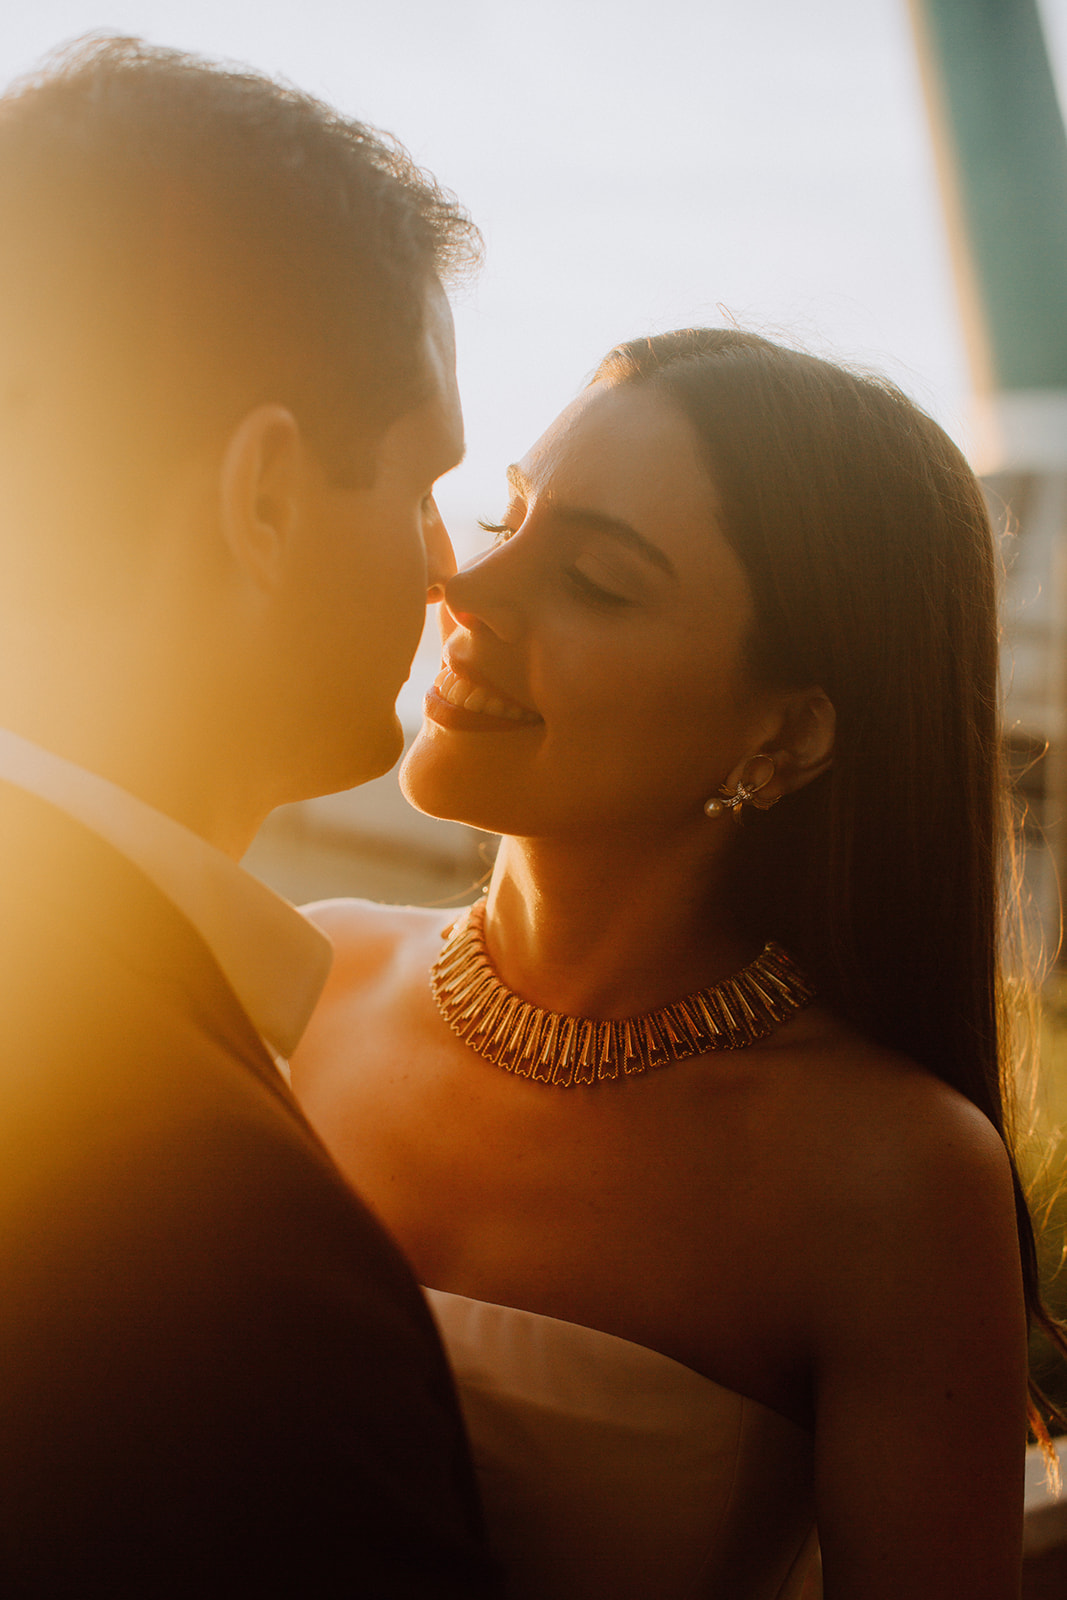 couple pose together with the beautiful sunset in the background during their dreamy wedding rehearsal photography